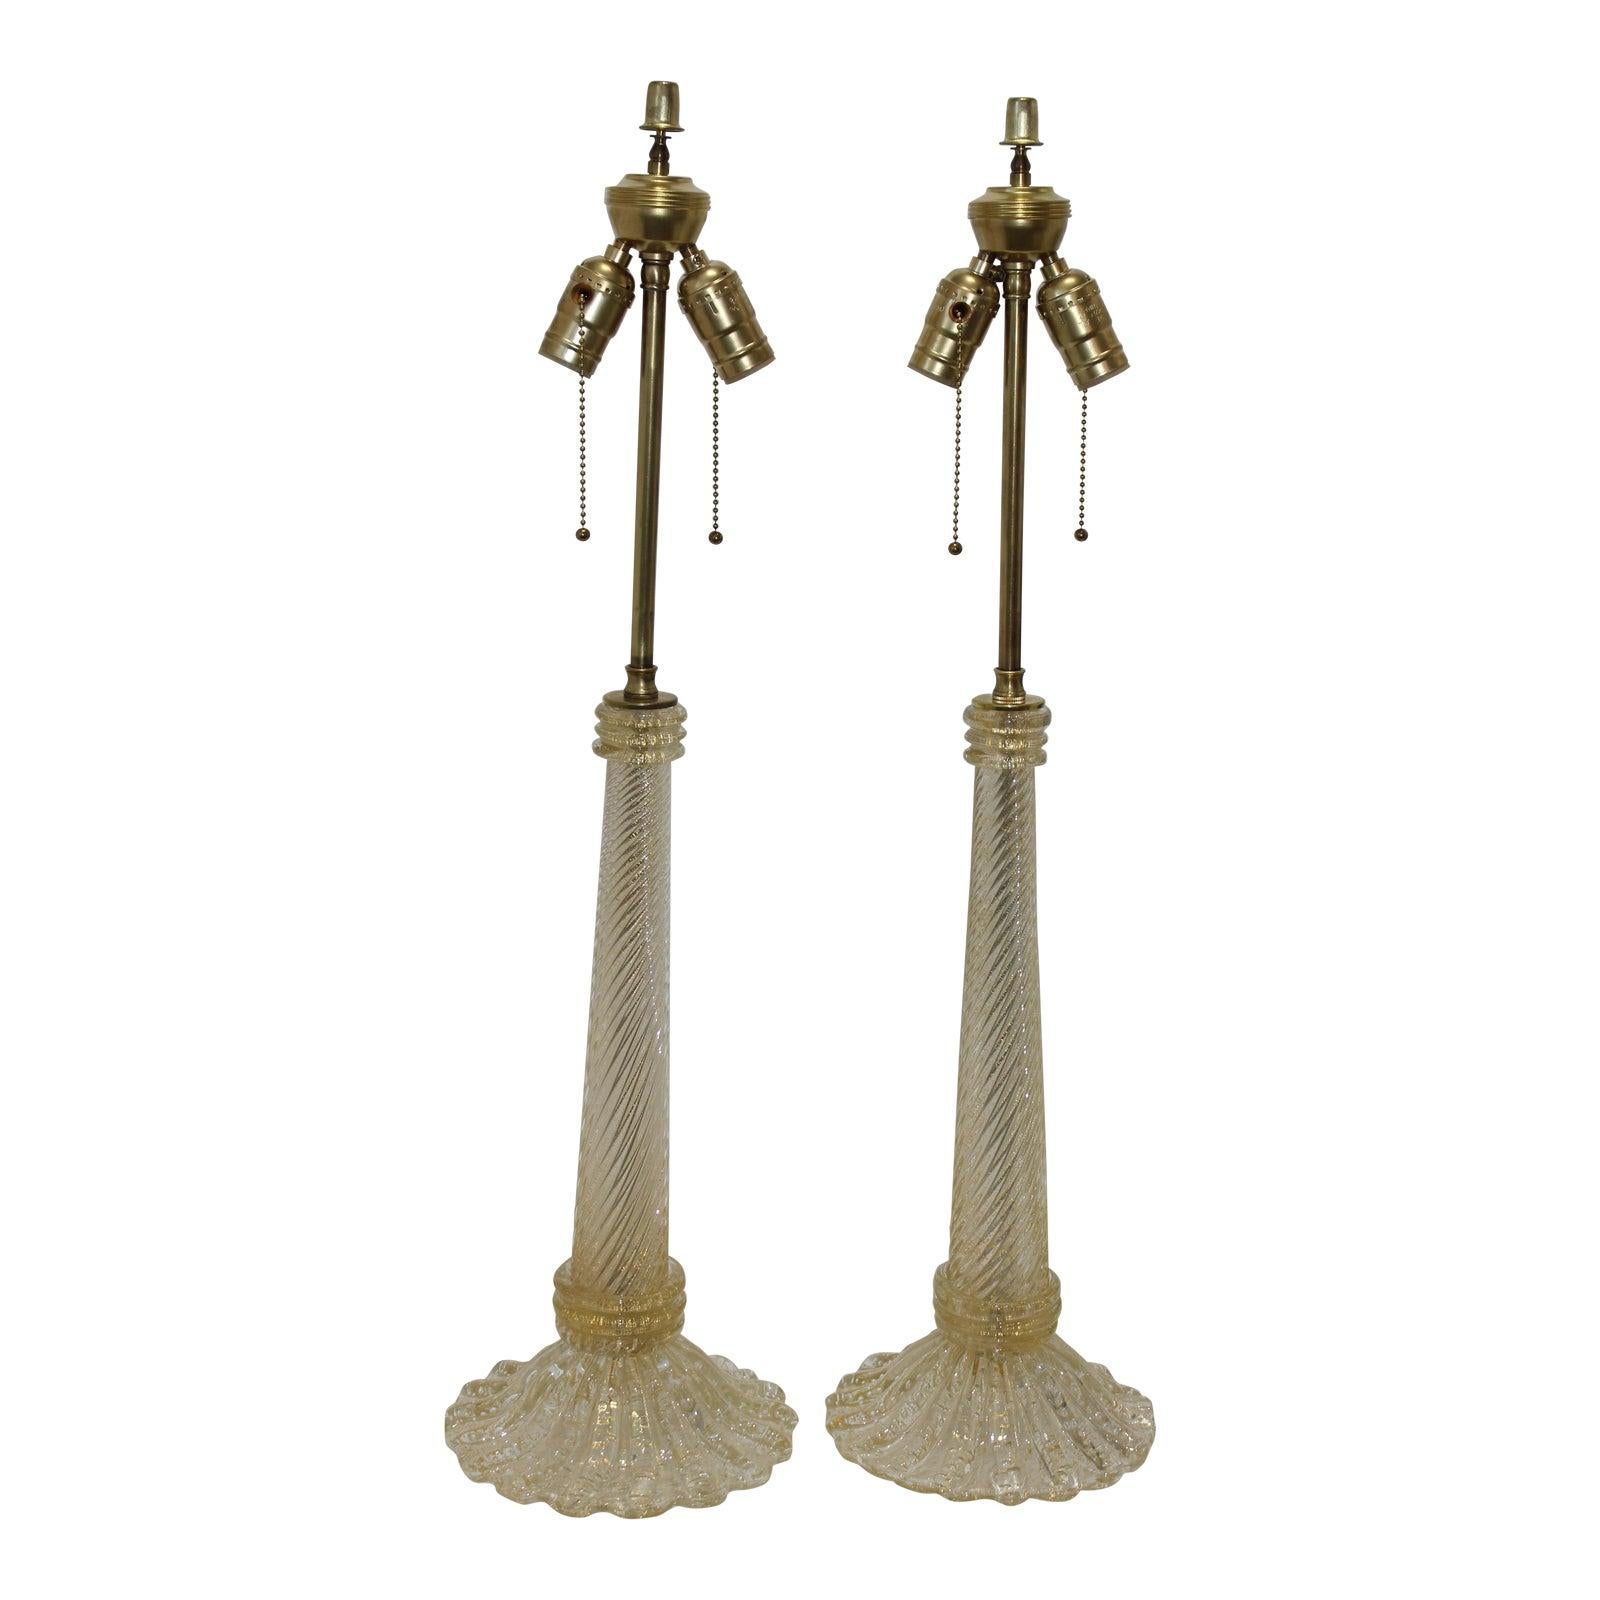 This stylish pair of Barovier & Toso Murano glass table lamps date to the 1920s-1930s . The pieces are infused with gold particles that catch the light beautifully.

Note: The piece have been professionally rewired with new sockets and silk